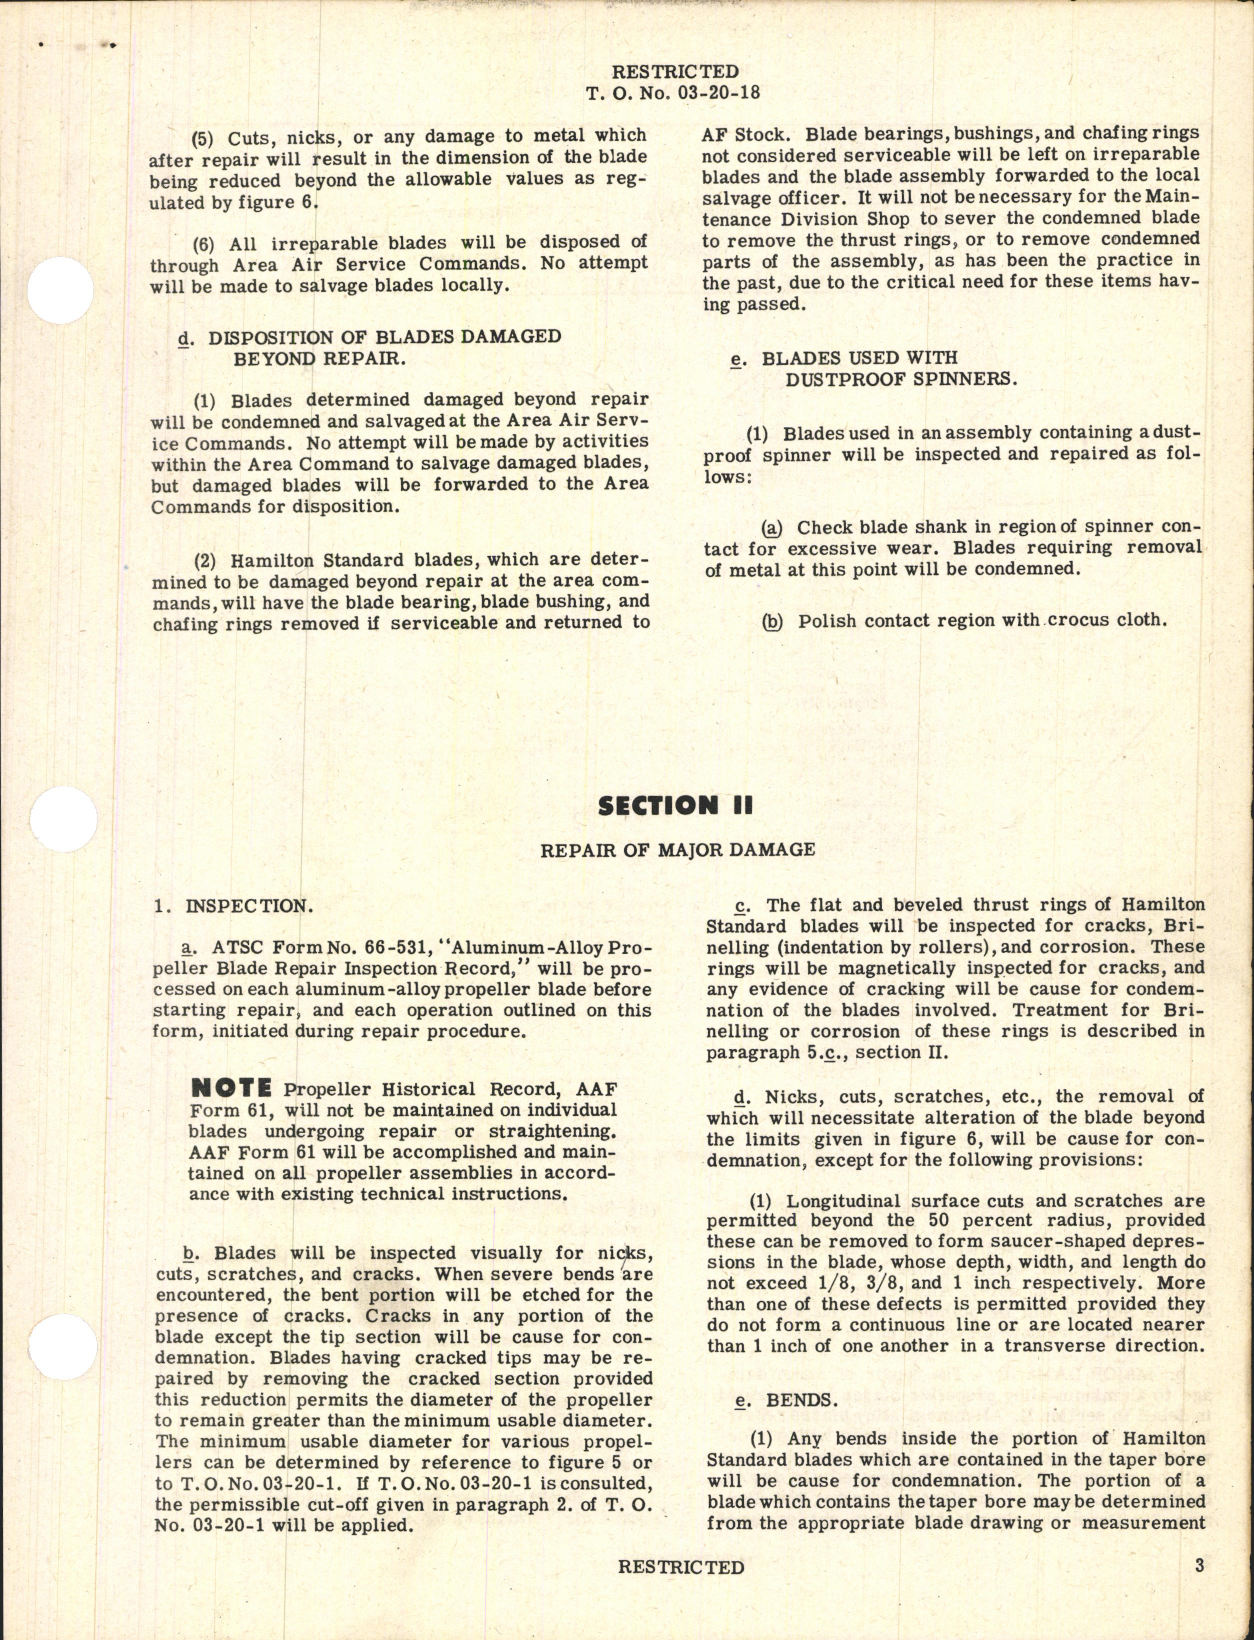 Sample page 7 from AirCorps Library document: Propellers and Accessories; Inspection, Repair, and Disposition of Damaged Aluminum-Alloy Propeller Blades